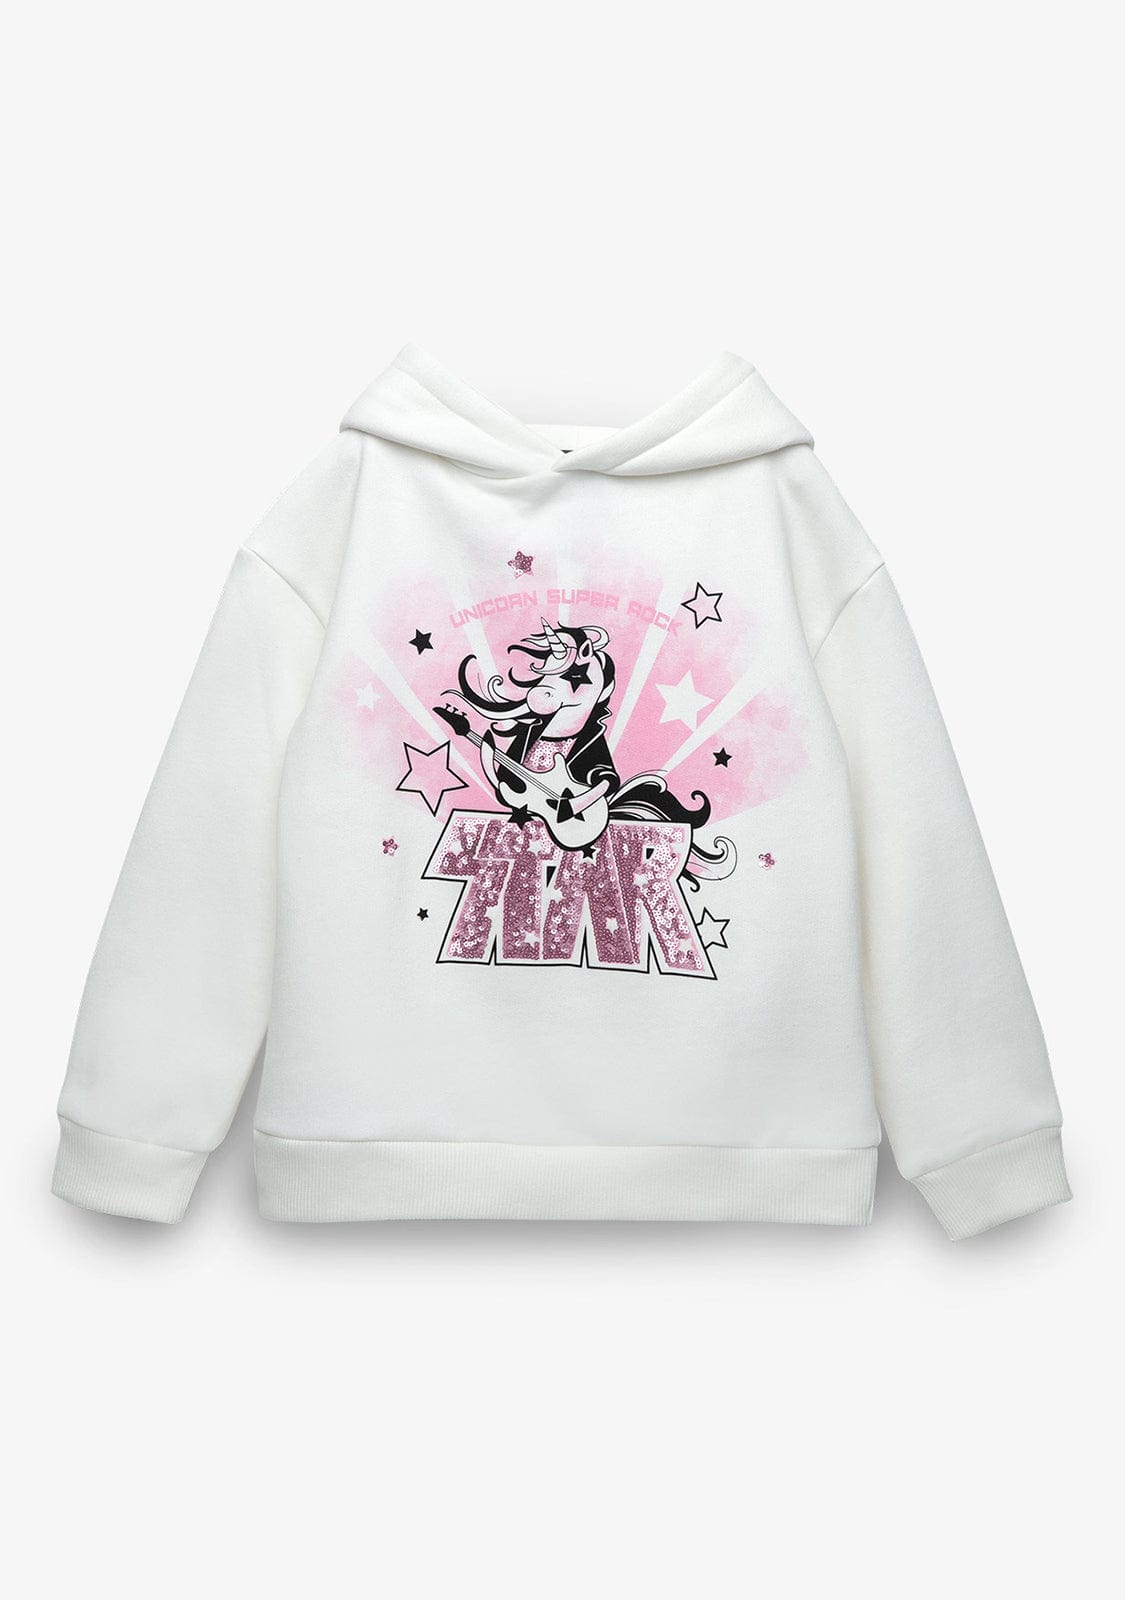 CONGUITOS TEXTIL Clothing Girl's White Rock Unicorn Hoodie